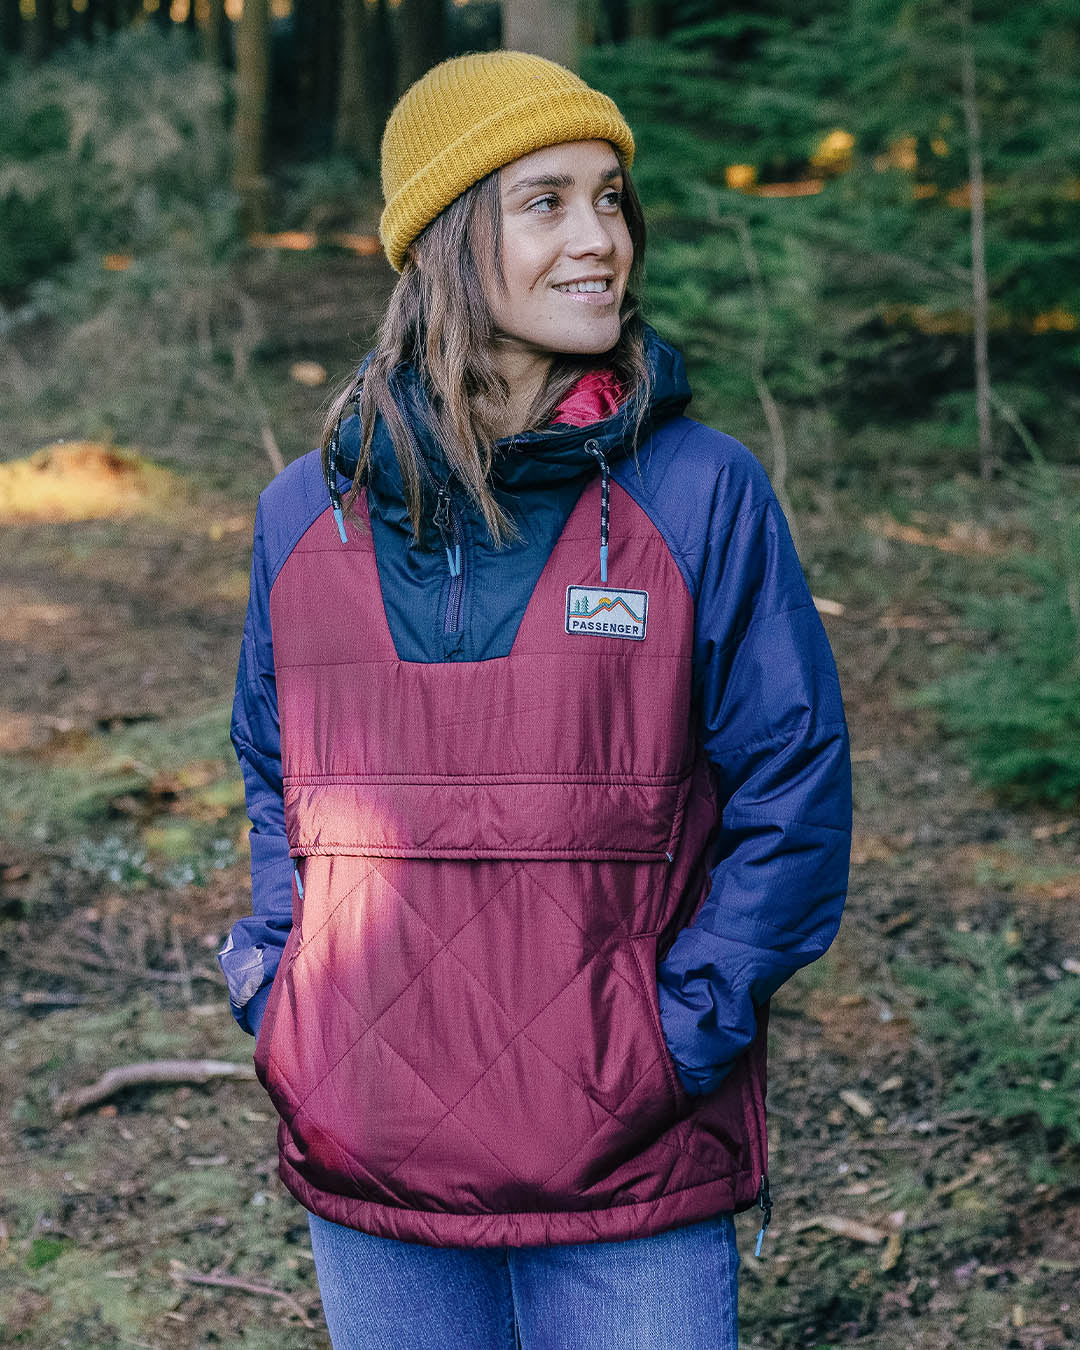 Unlock Wilderness' choice in the Passenger Vs Patagonia comparison, the Ocean Recycled Insulated 1/2 Zip Jacket by Passenger Clothing